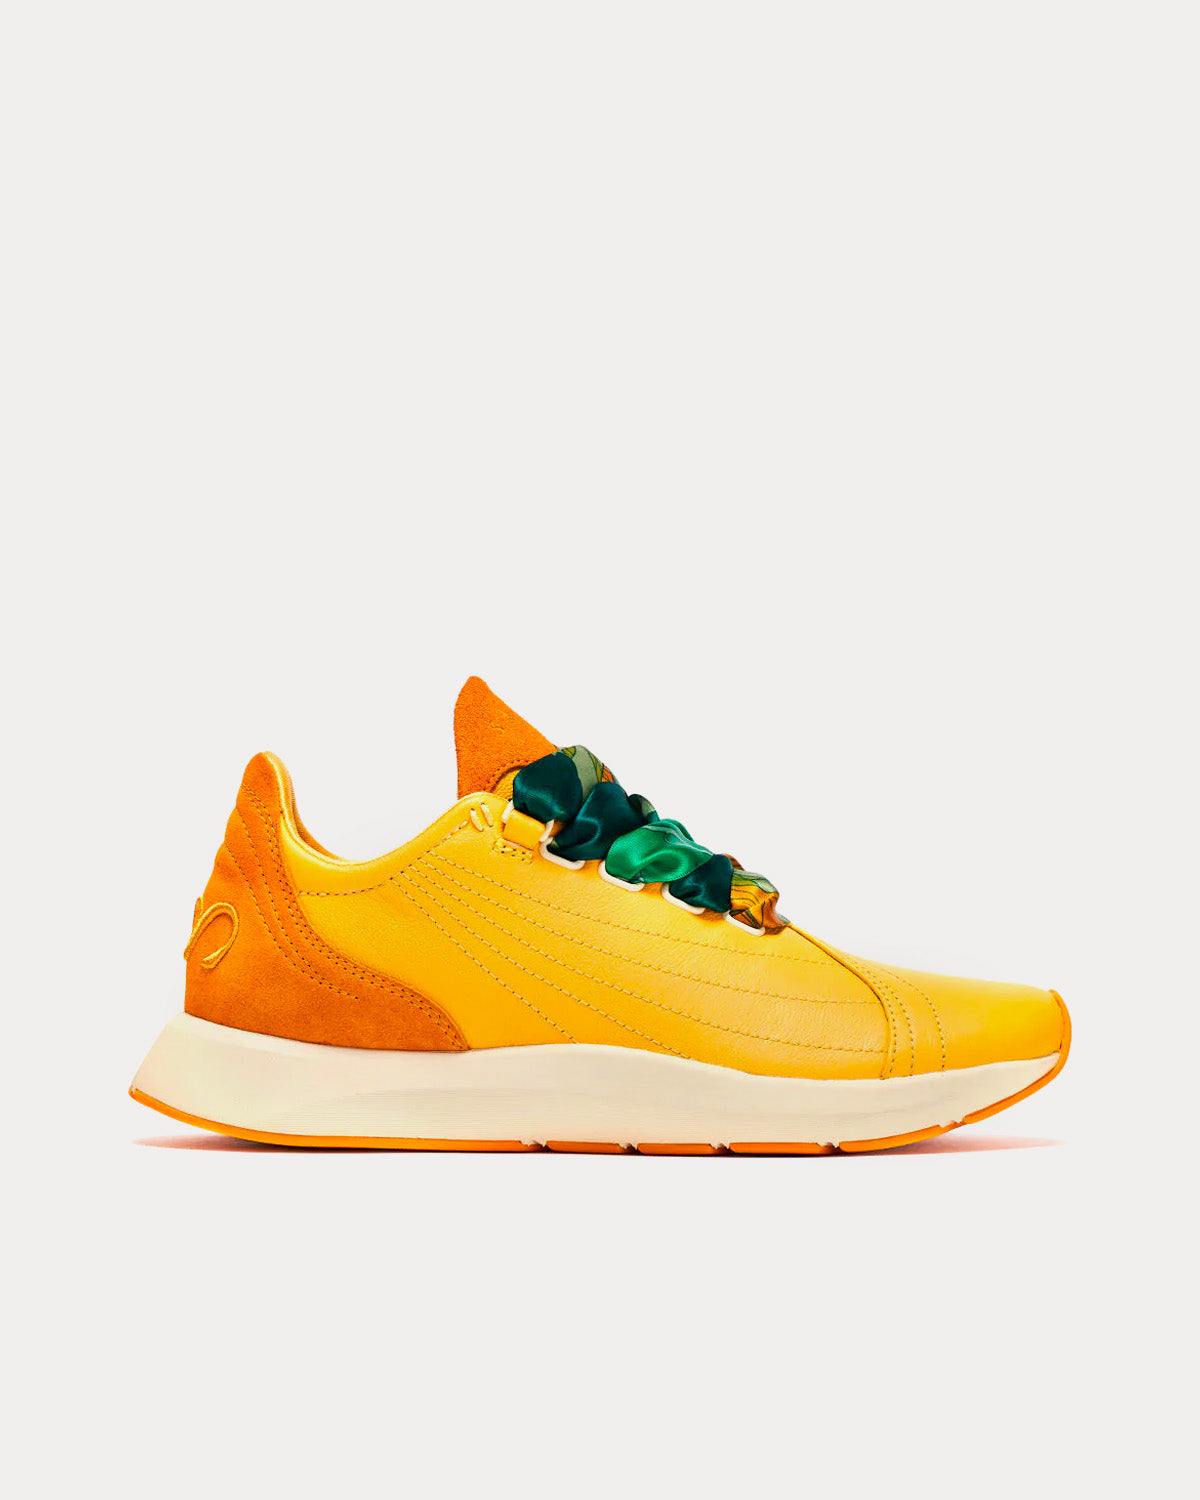 Saysh - Two Yellow Low Top Sneakers